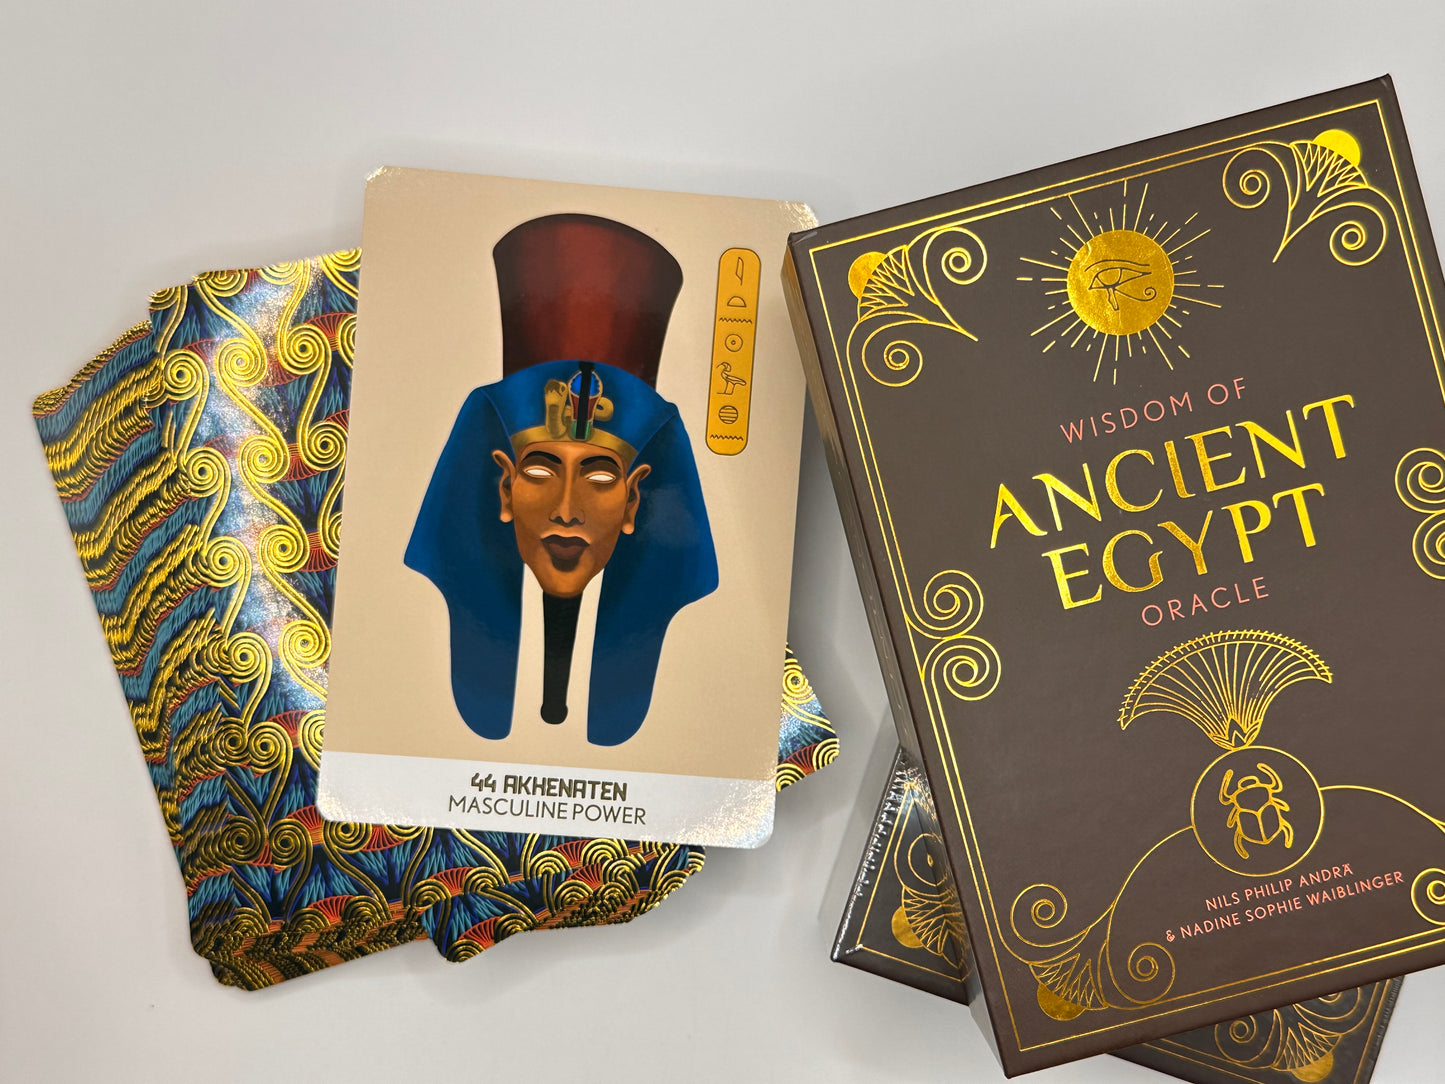 Limited Edition - WISDOM OF ANCIENT EGYPT ORACLE